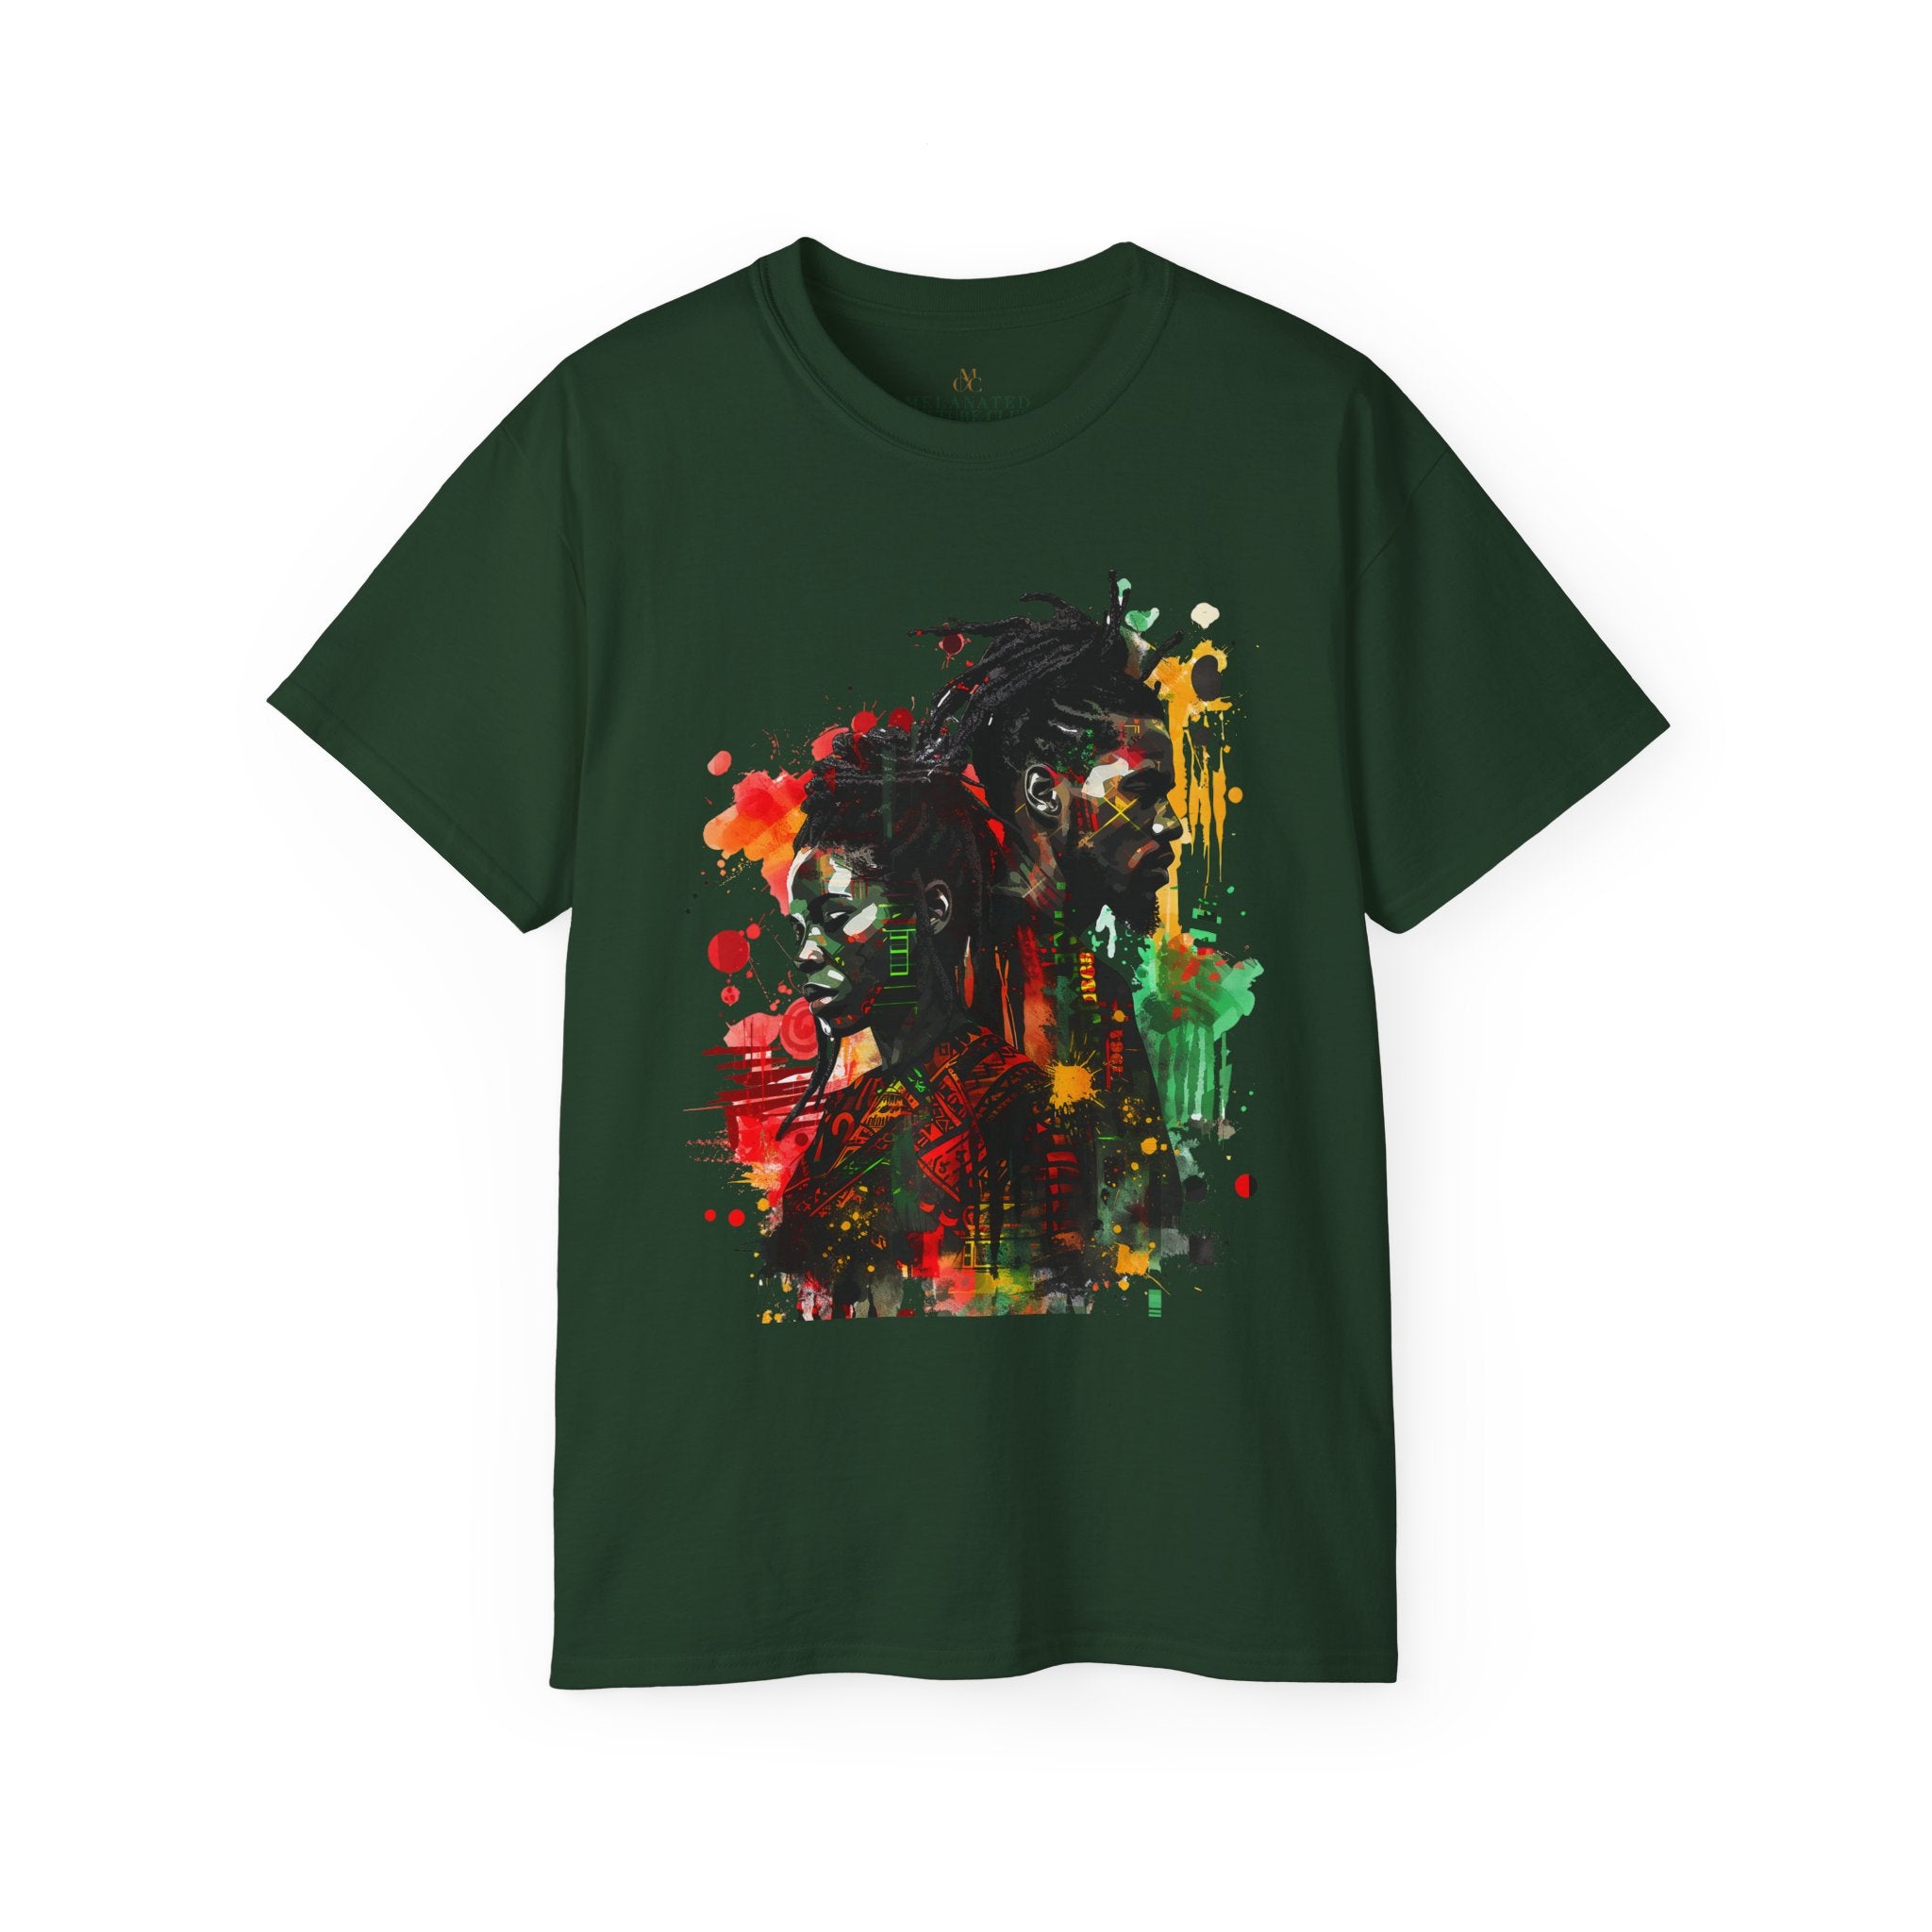 Abstract art tee shirt in forest green.